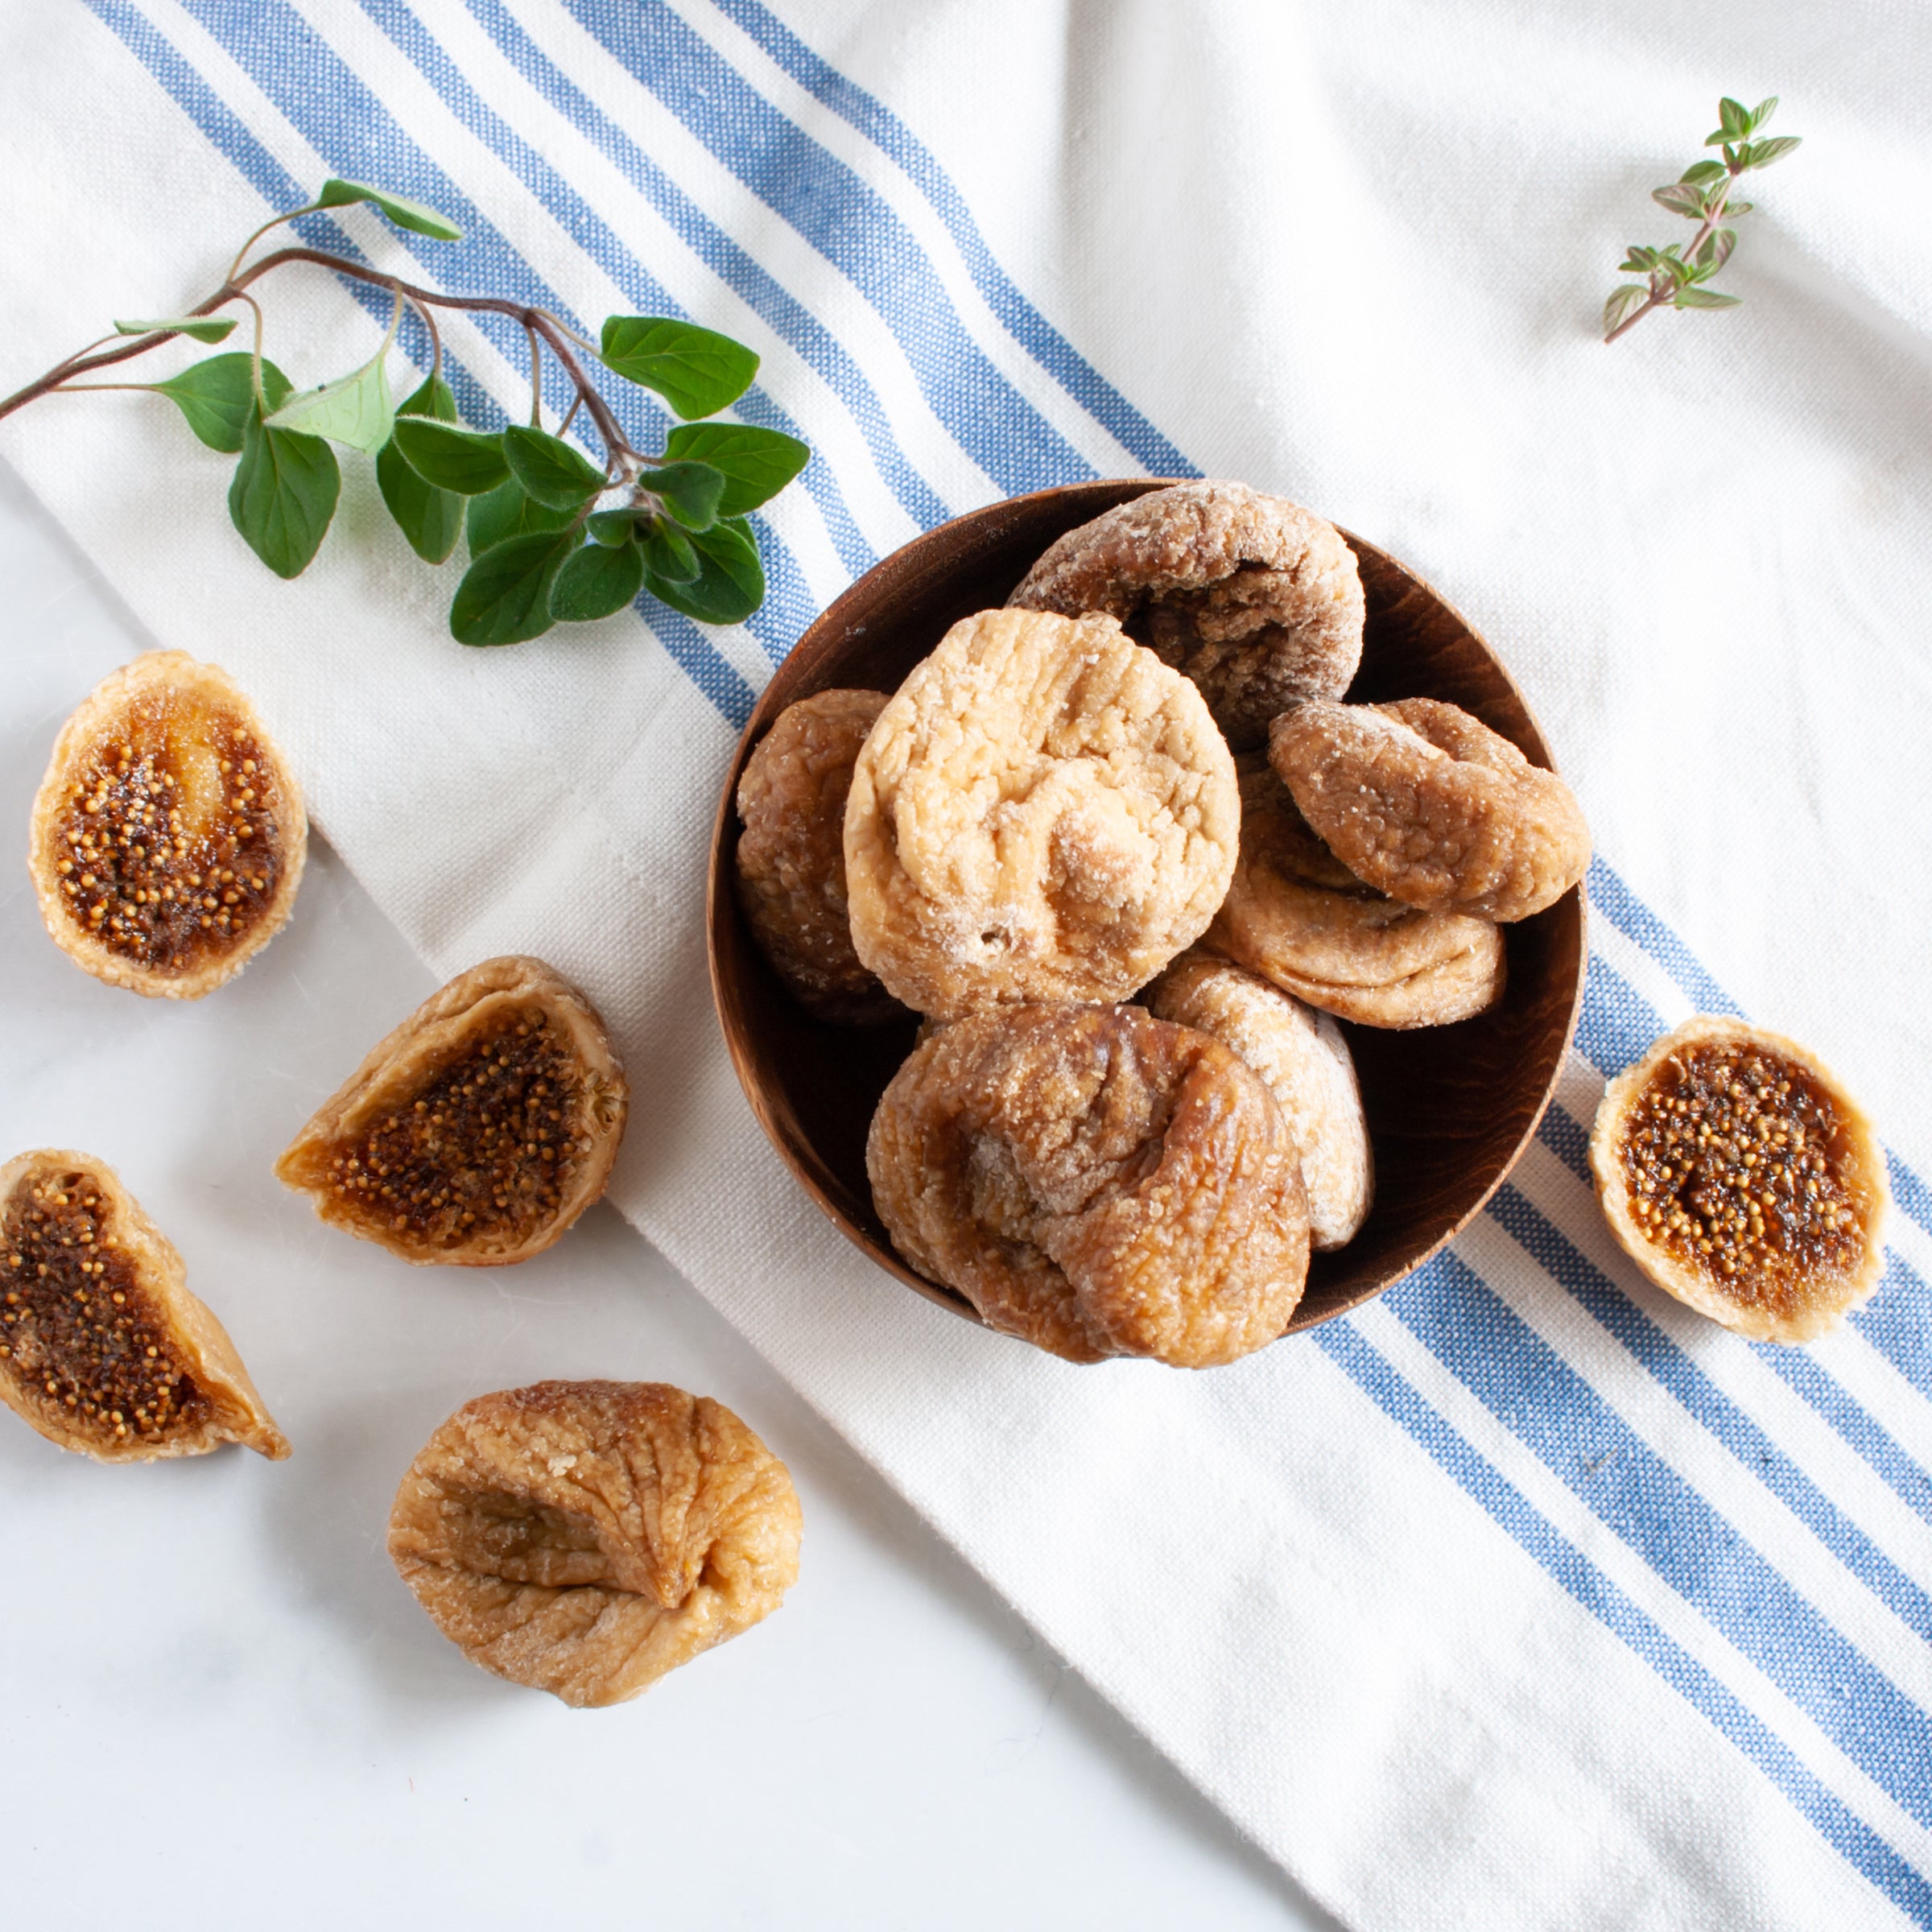 Organic Dried Figs_International Harvest_Dried Fruits, Nuts & Seeds